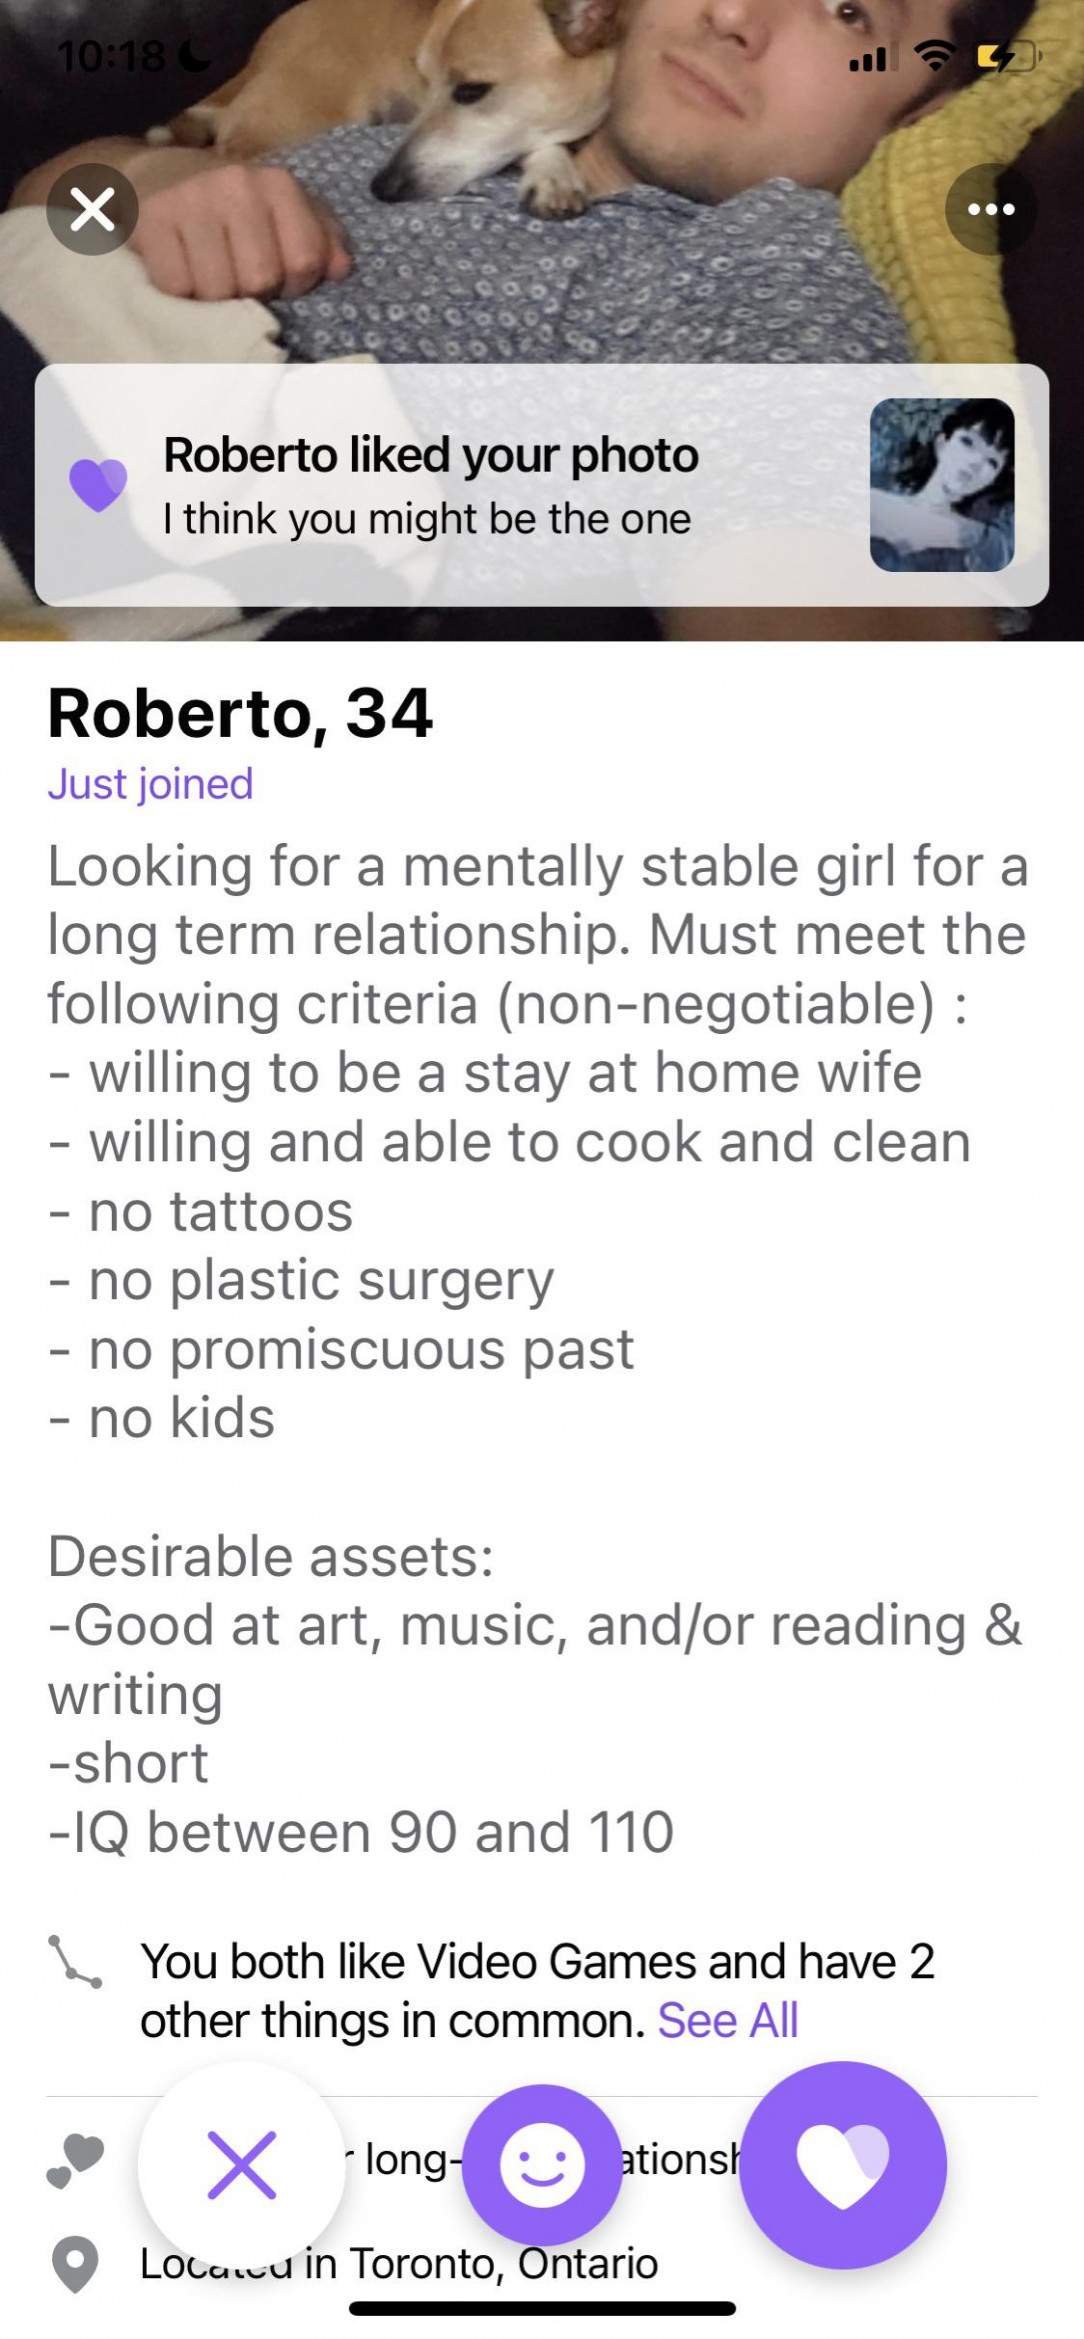 What does Roberto bring to the table? Looking for a slave?